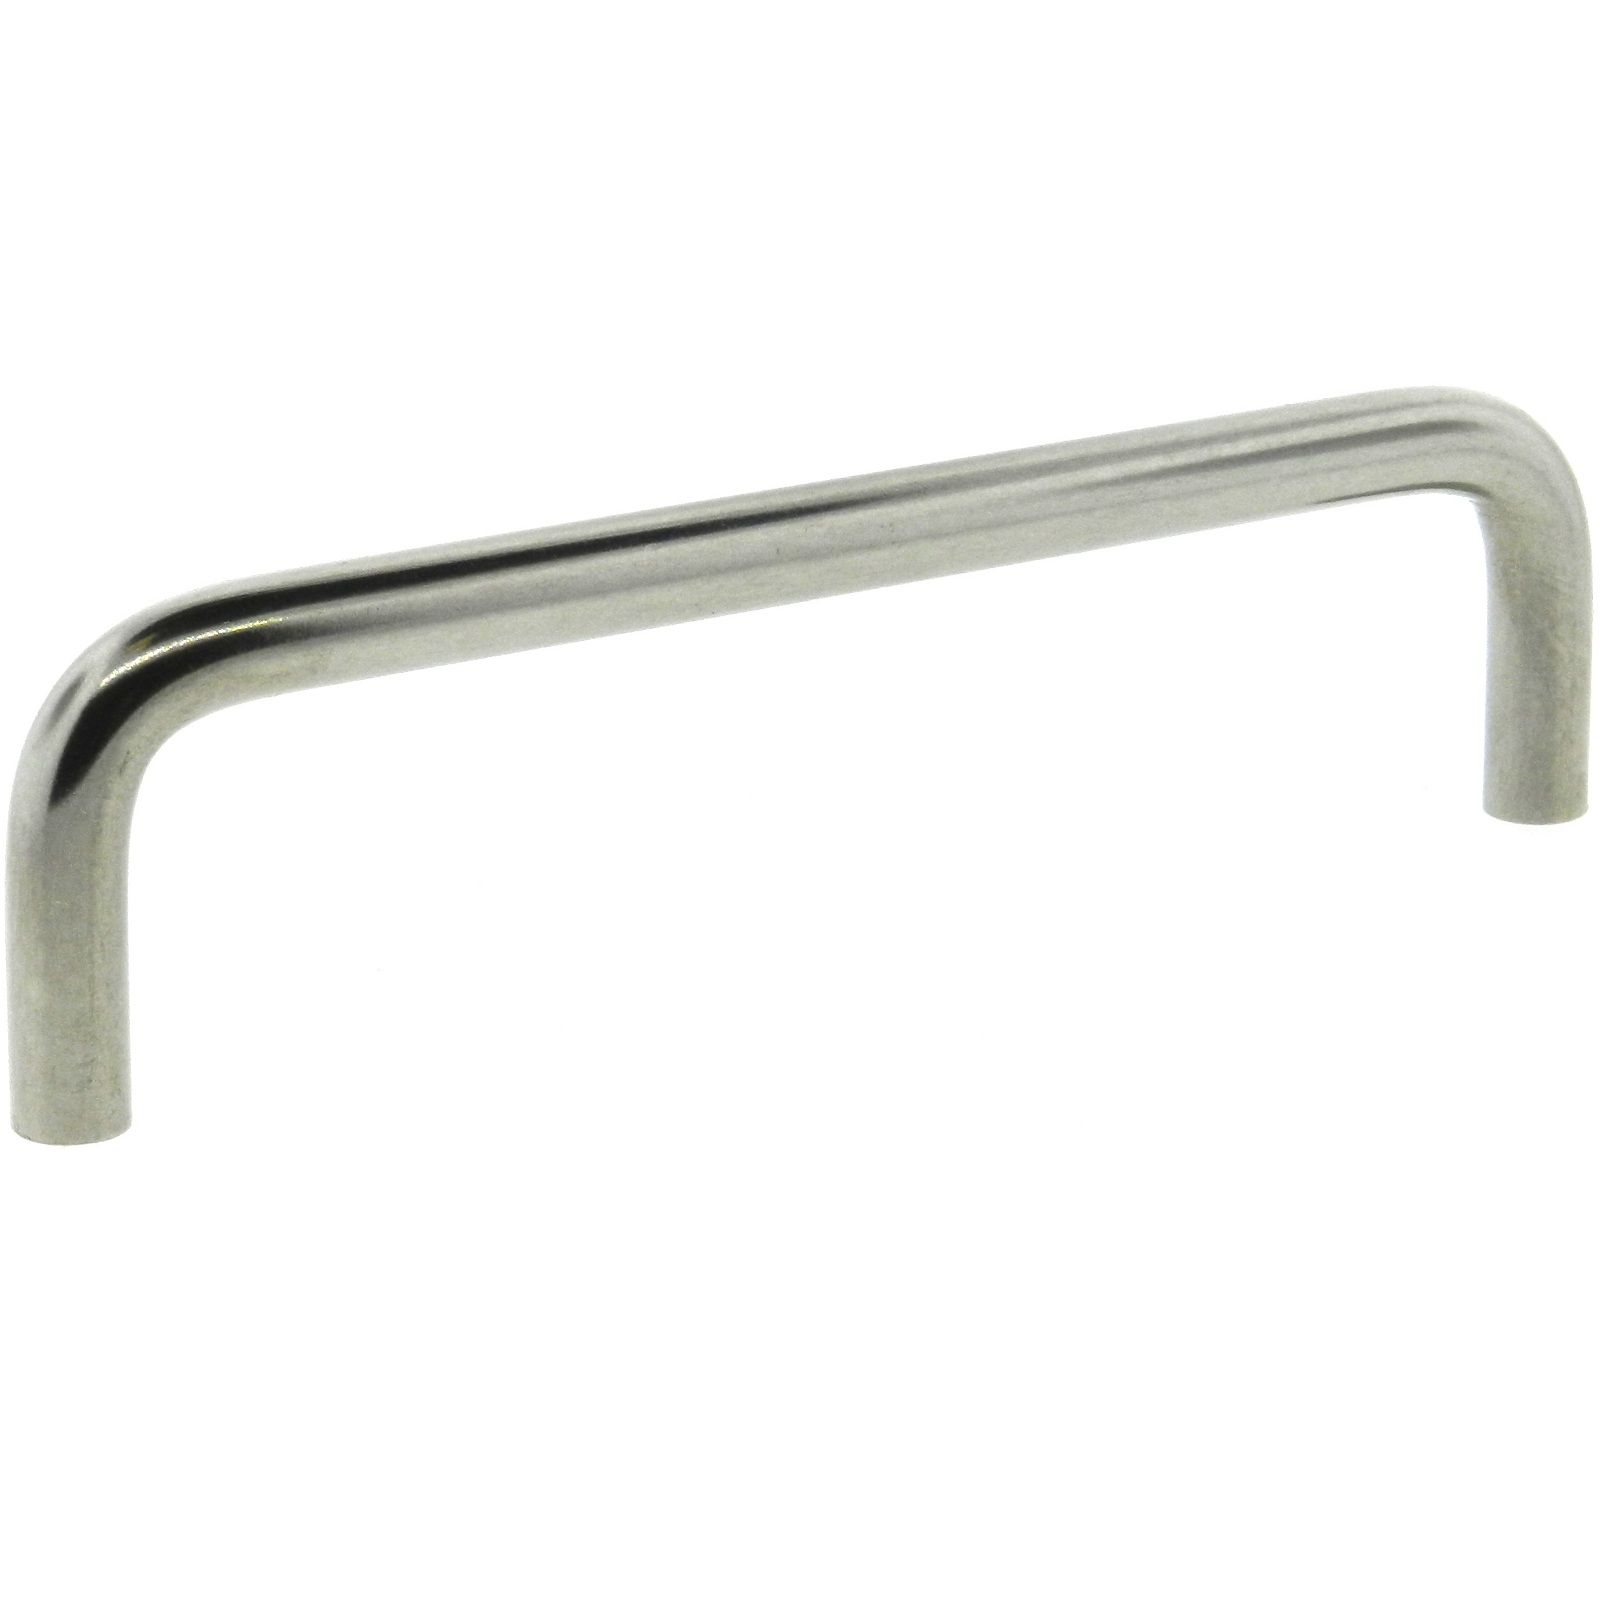  Stainless  Steel Wire Pull Handle  Pull Handles 